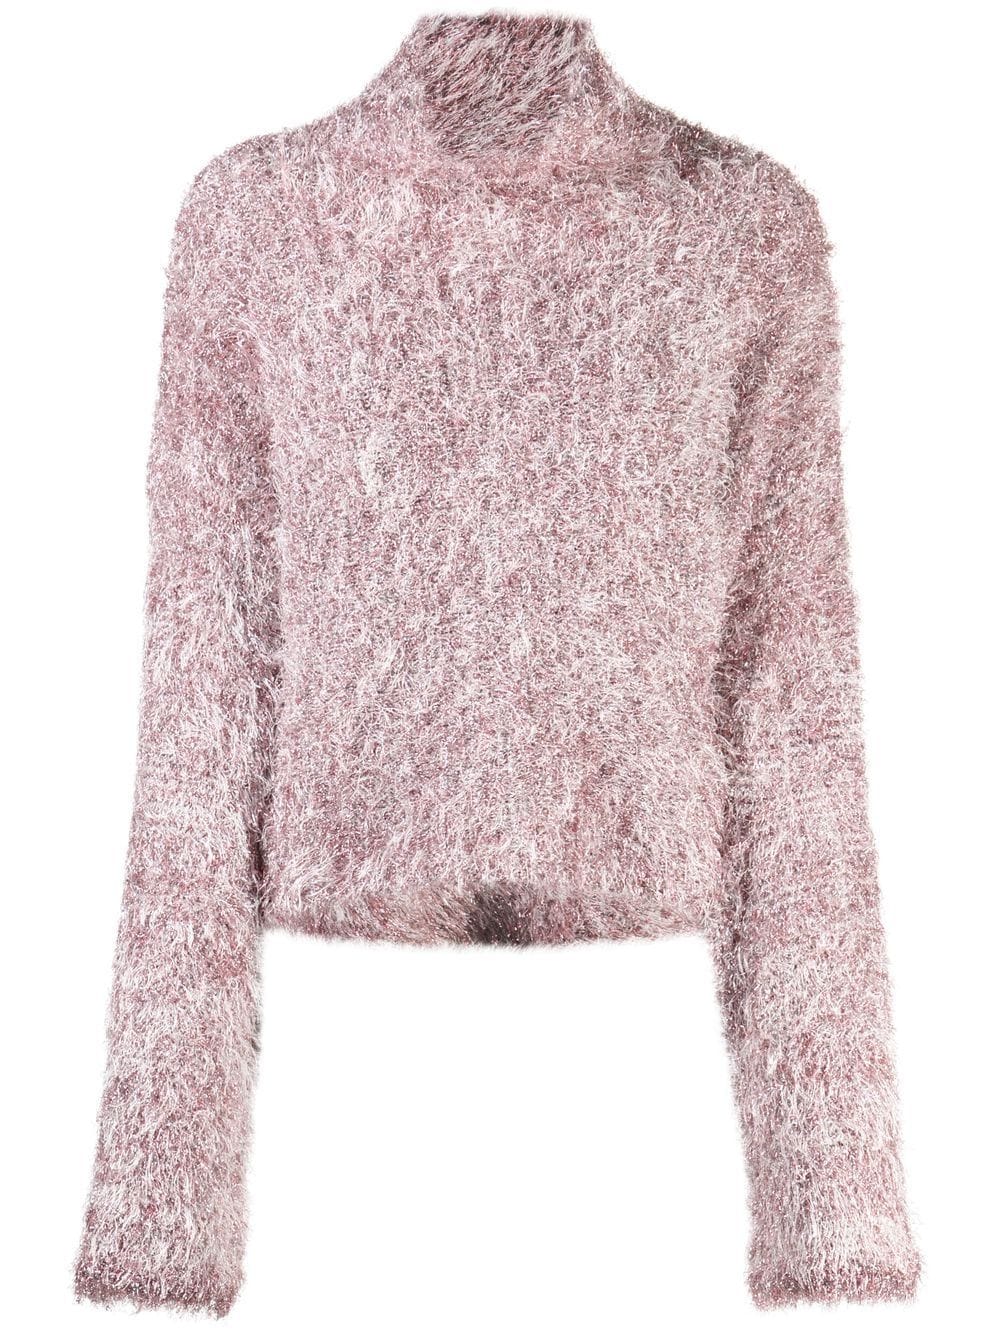 JW Anderson cut-out cropped jumper - Pink